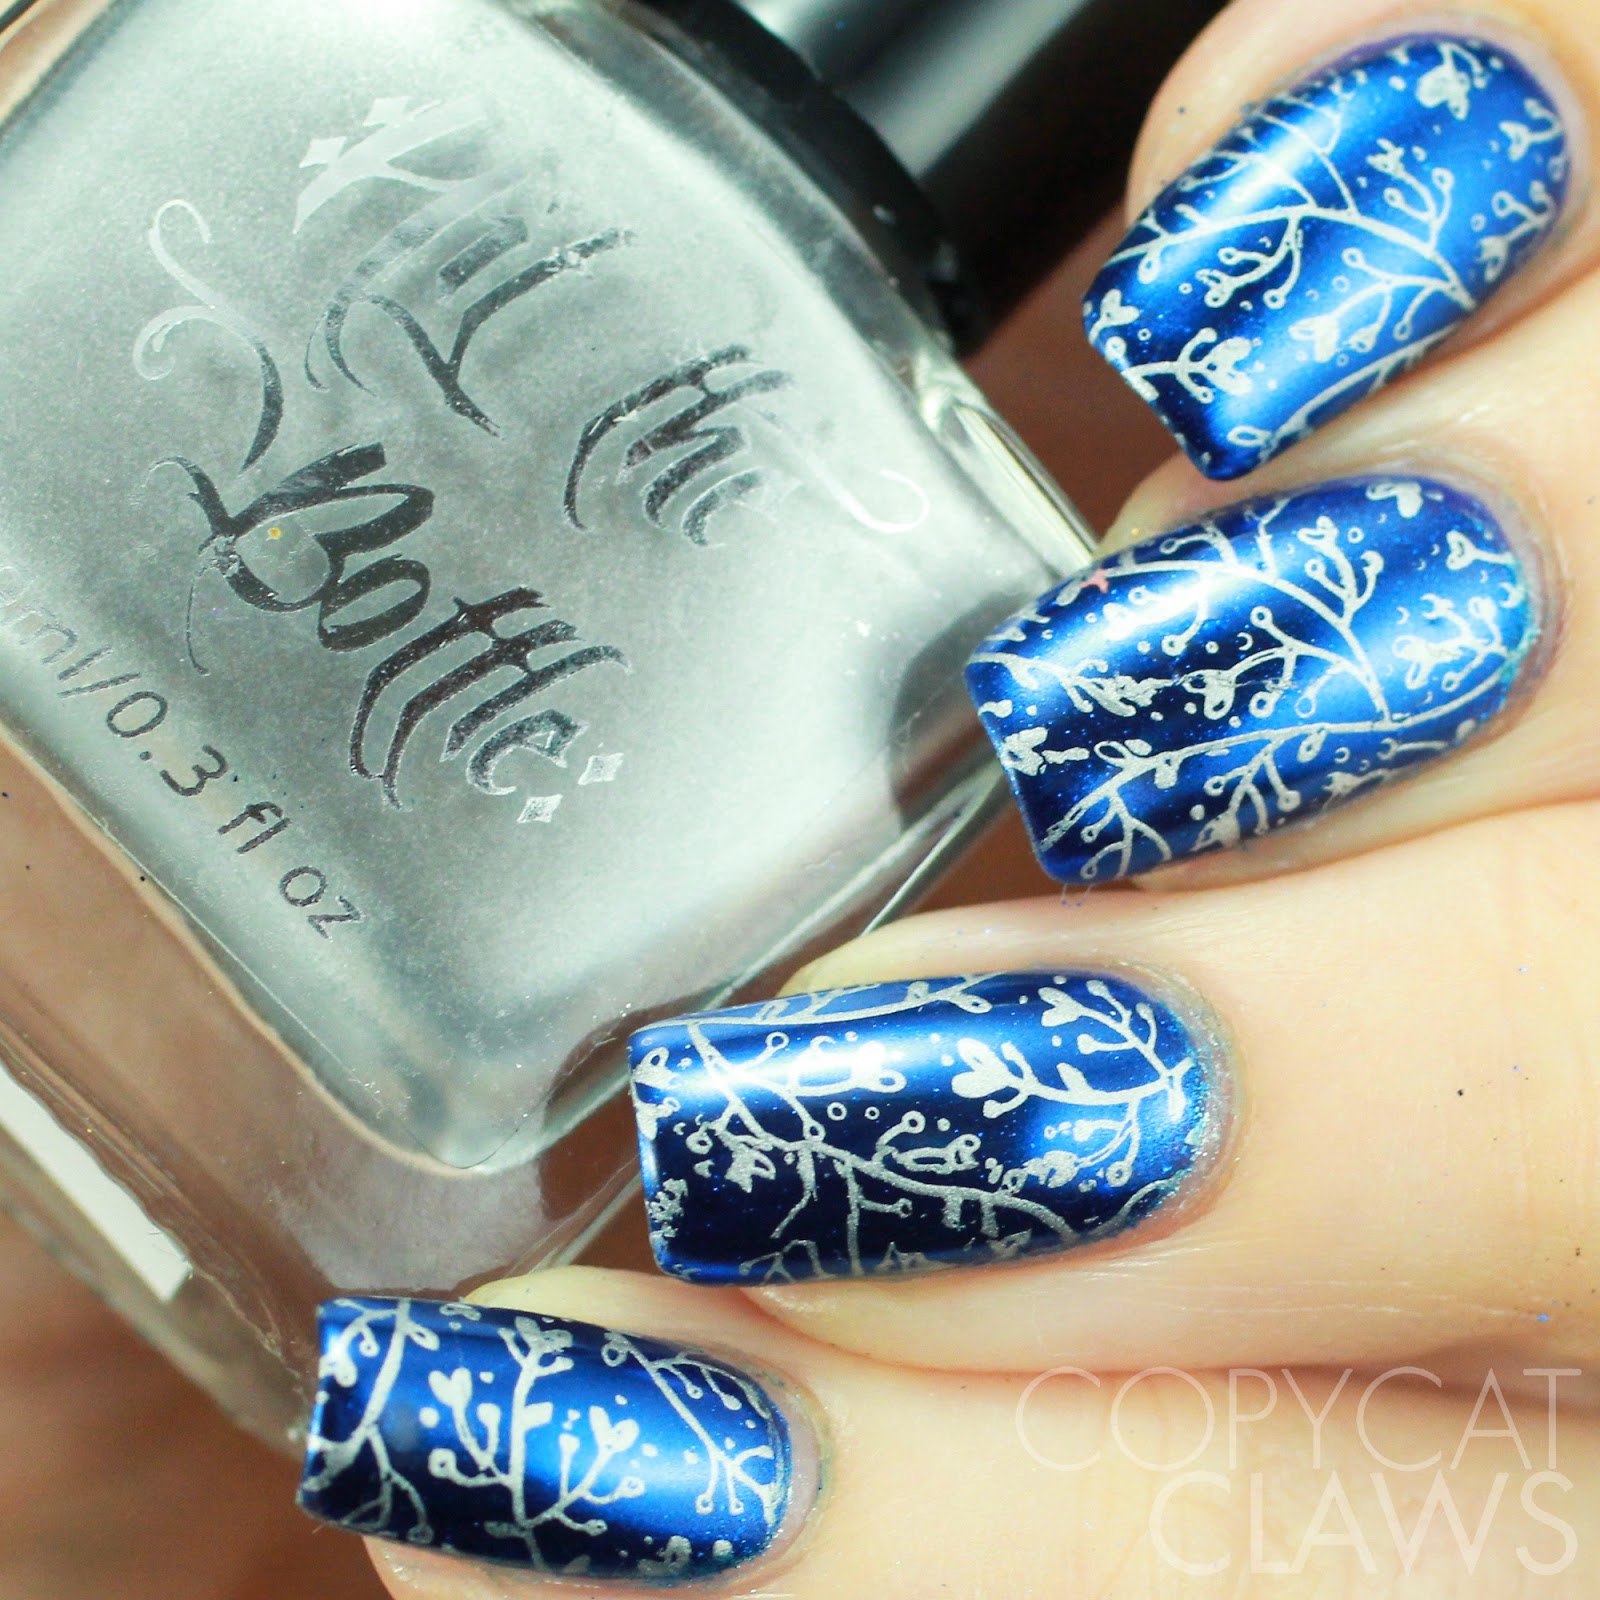 Copycat Claws: Maniology + Nails by Miri BM-XL222 Stamping Plate Review